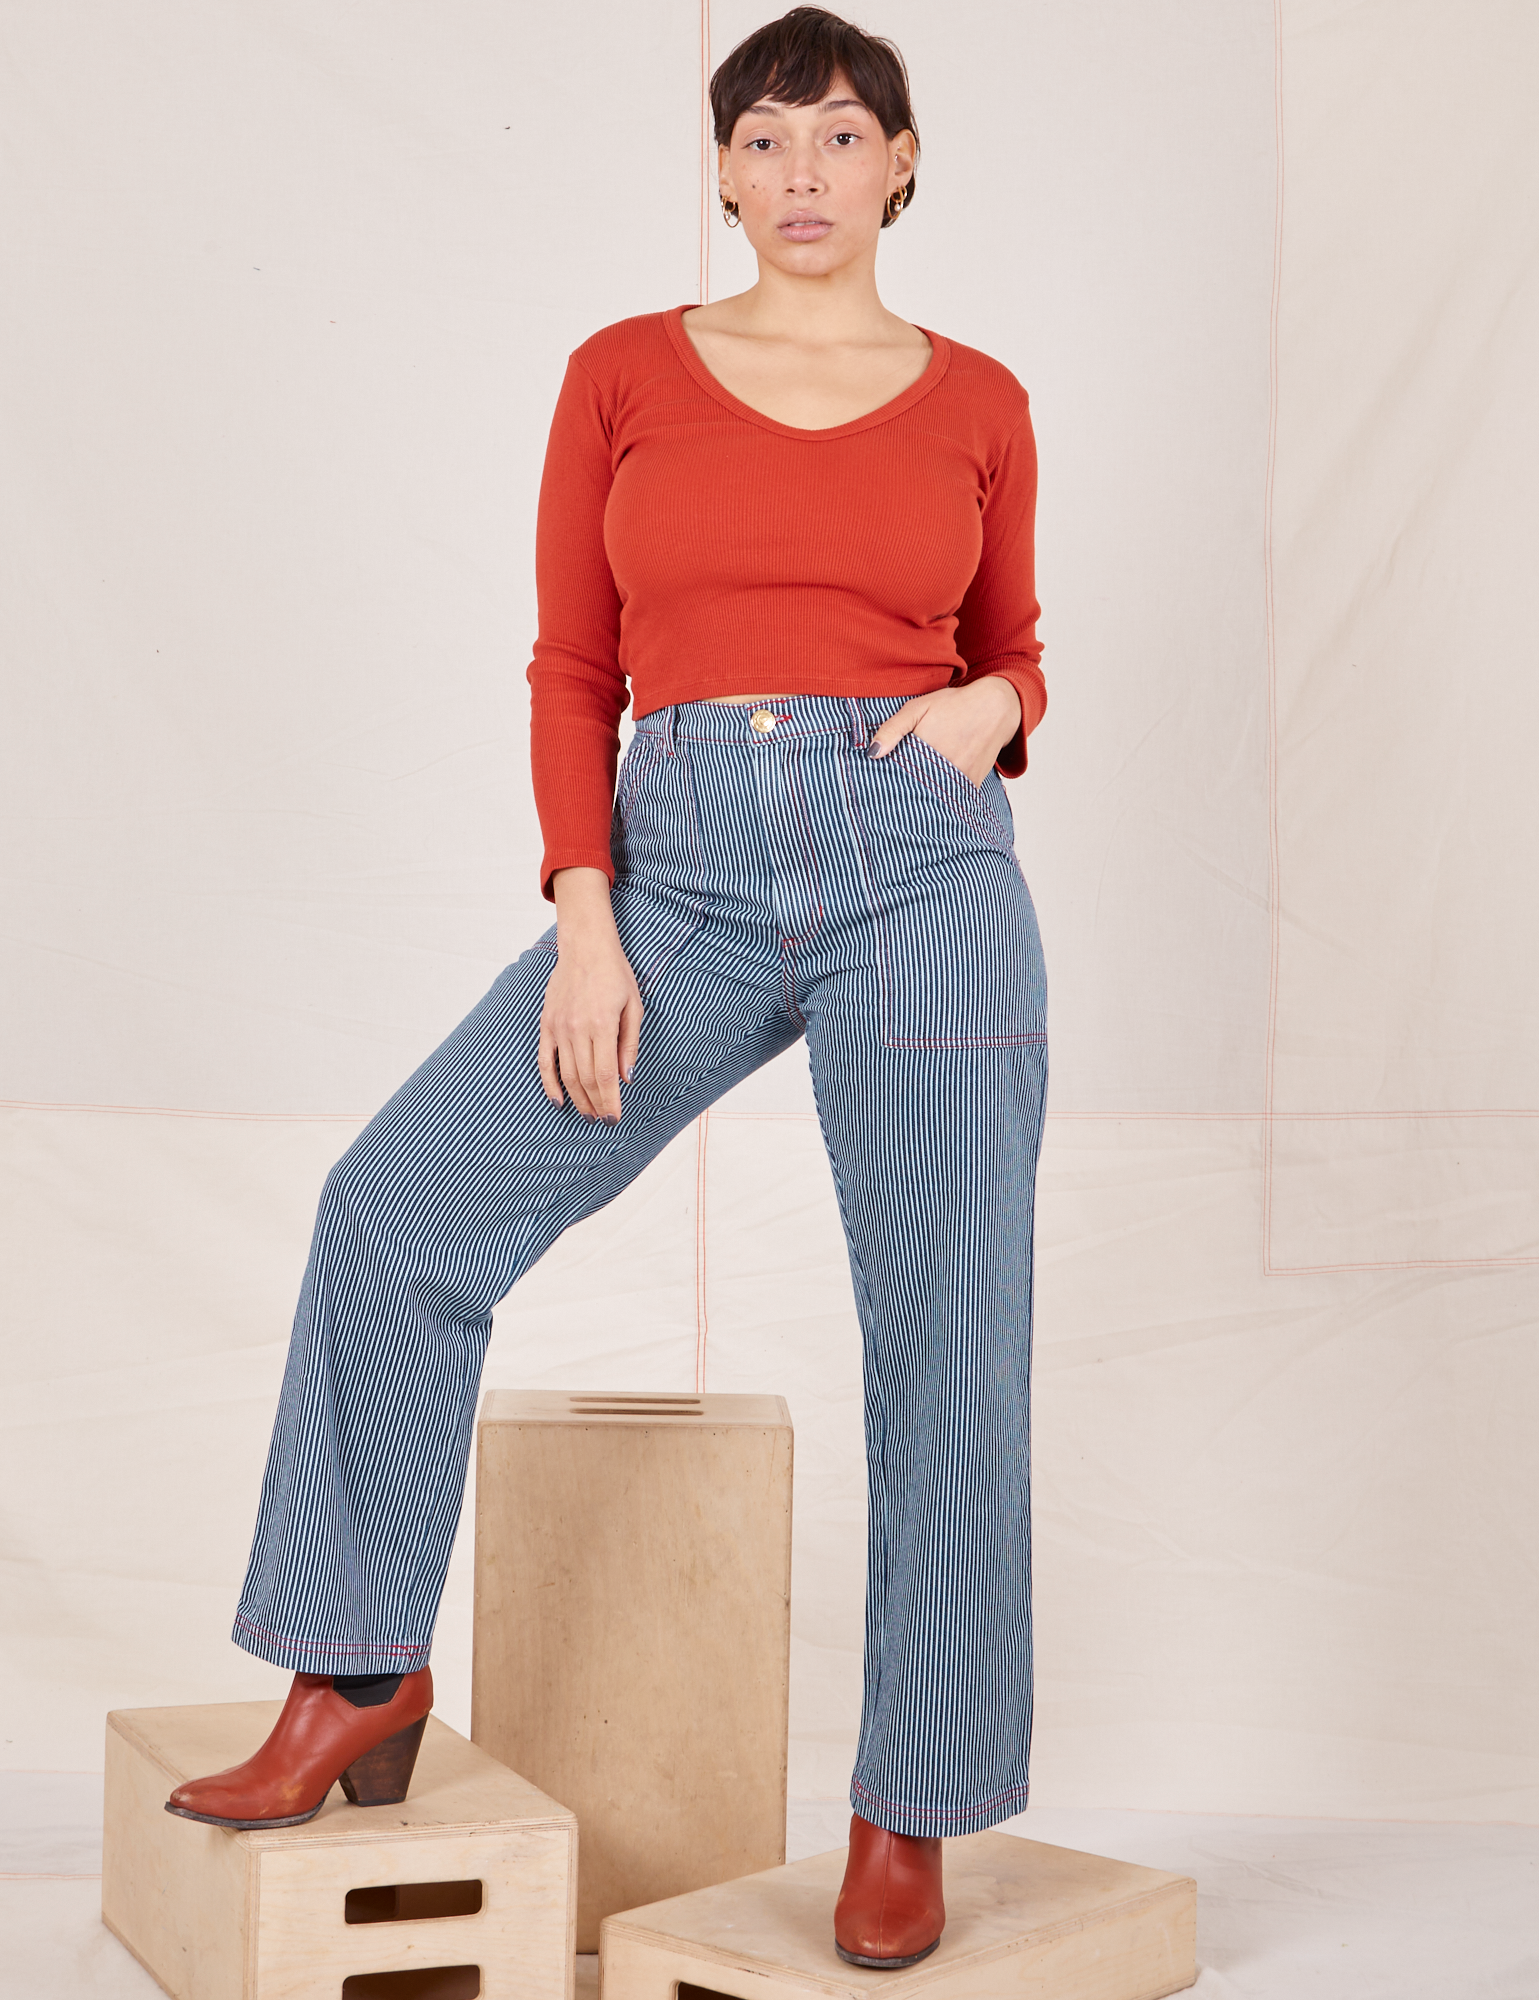 Tiara is 5&#39;4&quot; and wearing S Railroad Stripe Denim Work Pants paired with a paprika Long Sleeve V-Neck Tee